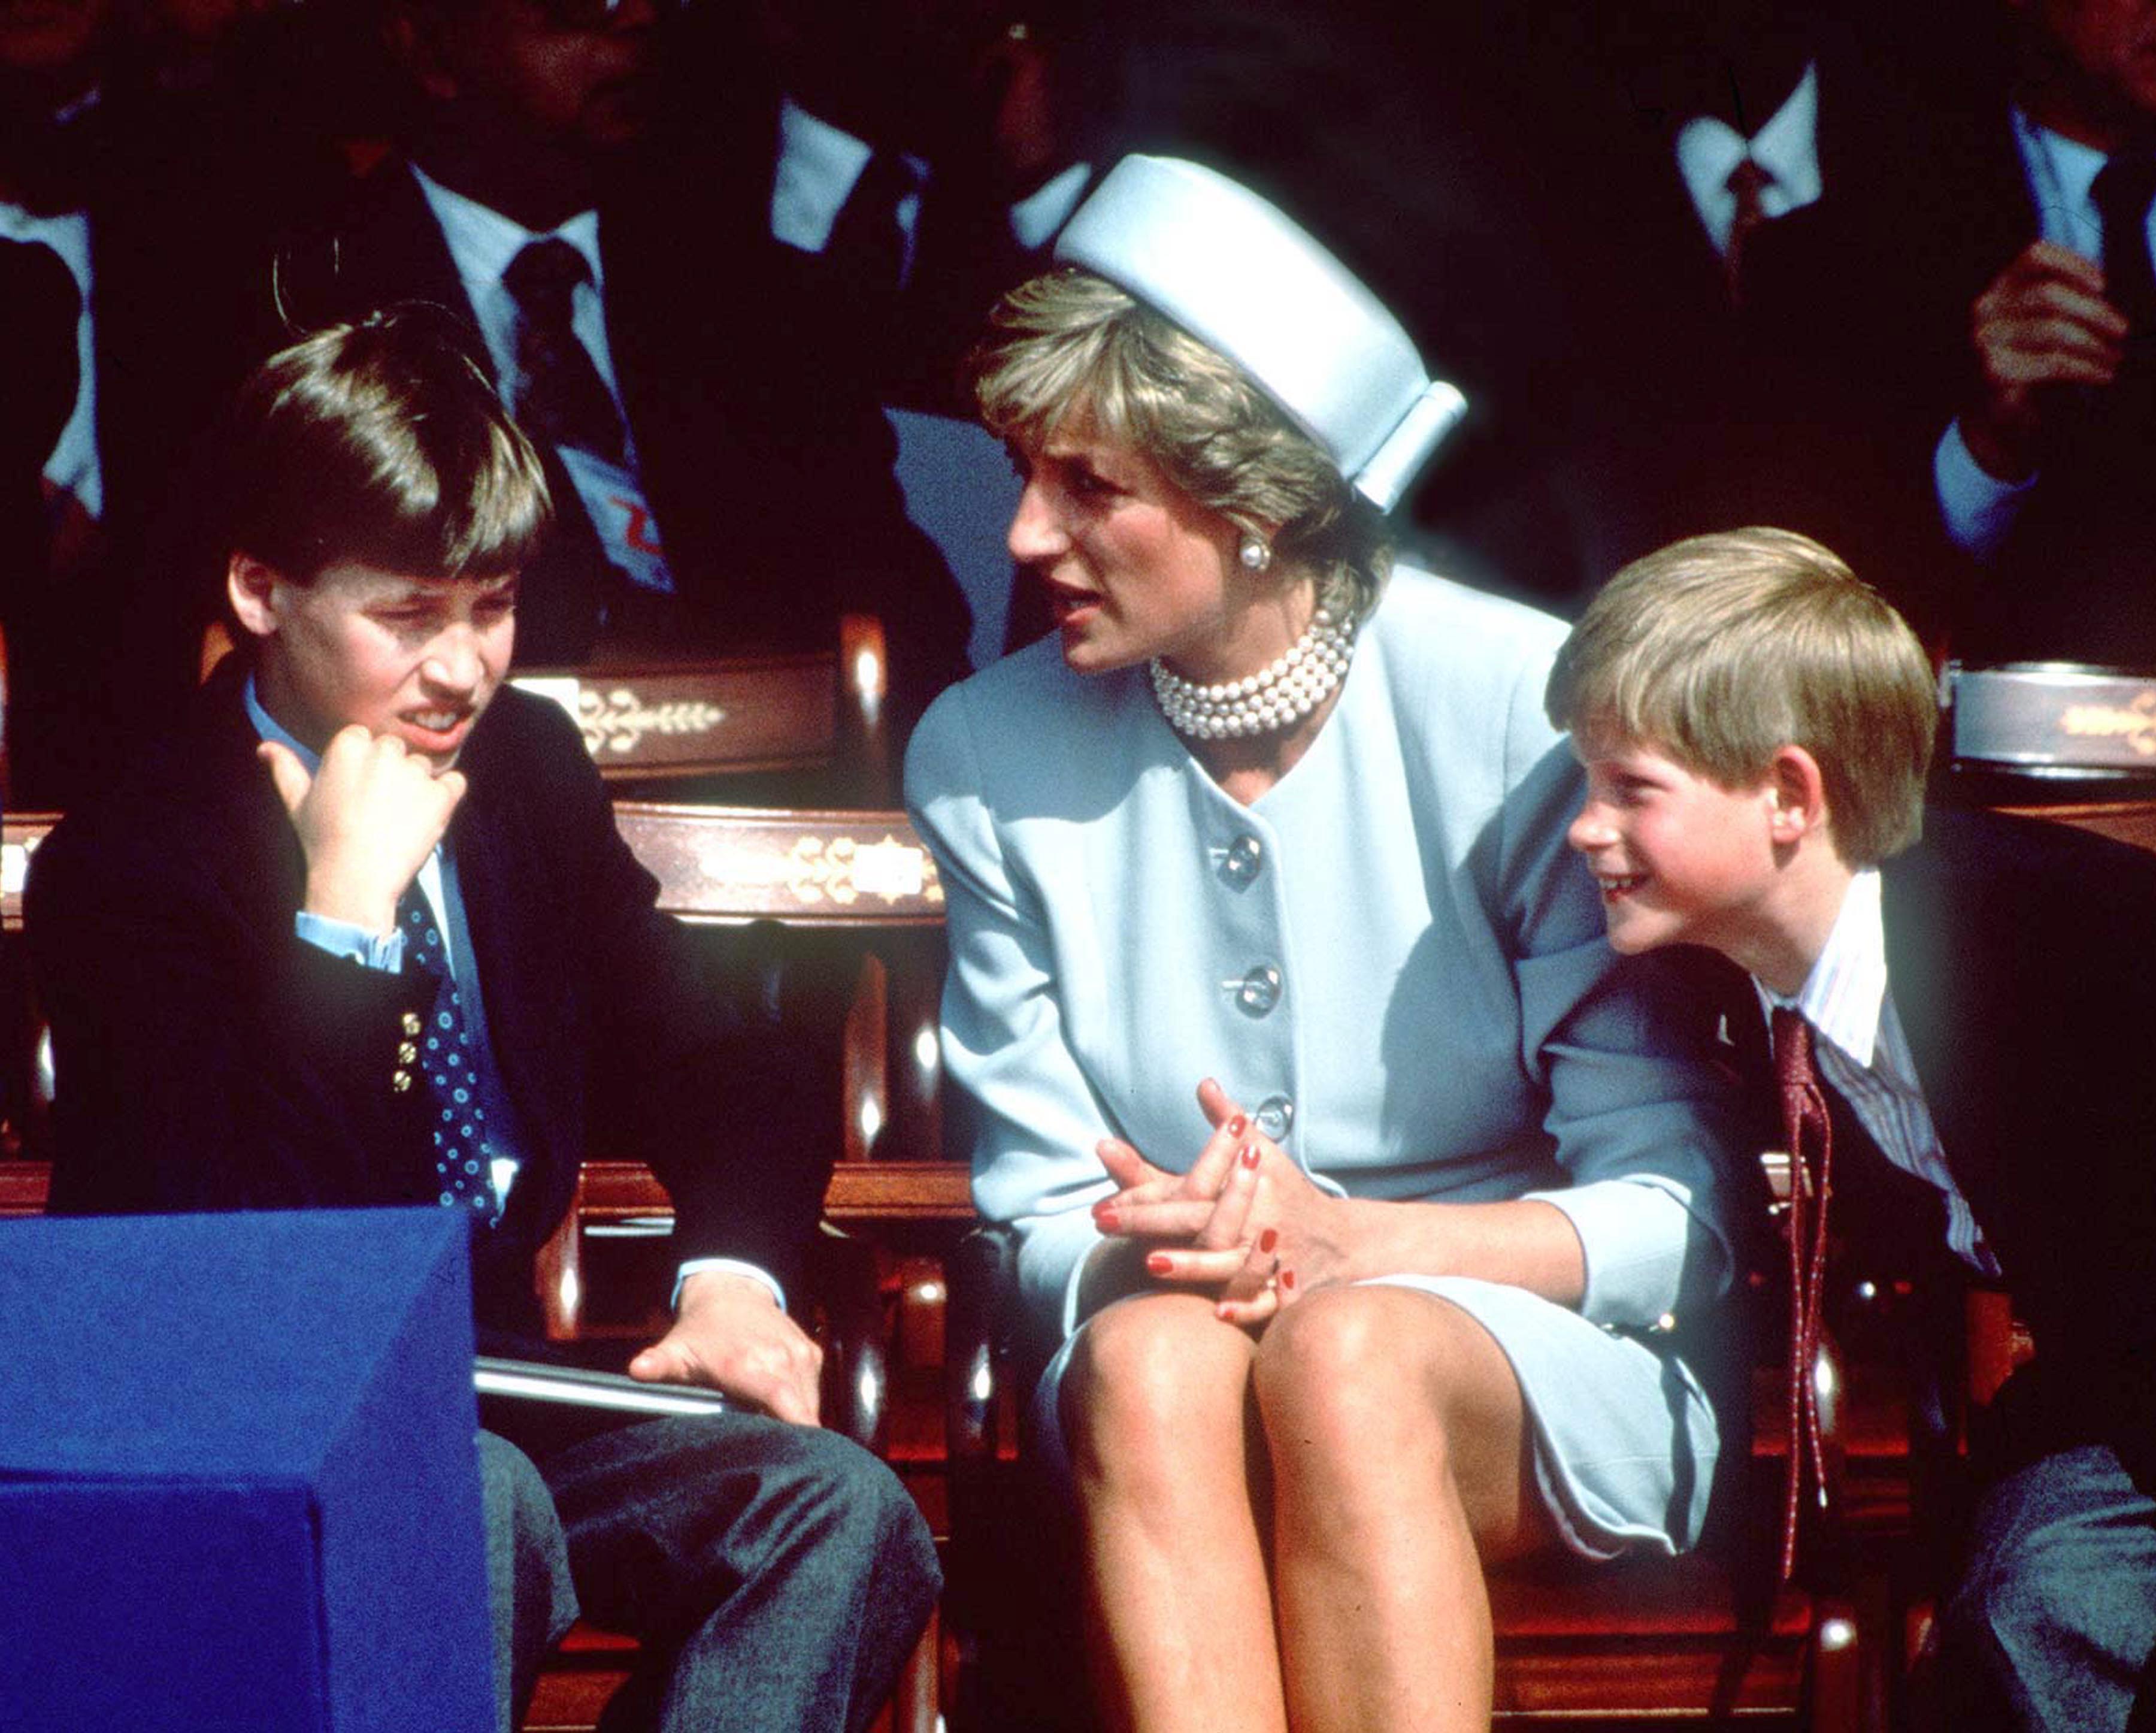 Princess Diana (1961 - 1997) with her sons Prince William and Prince Harry at the V.E Day commemorations in Hyde Park, London, May 1995. (Rota/Pool/Getty Images)